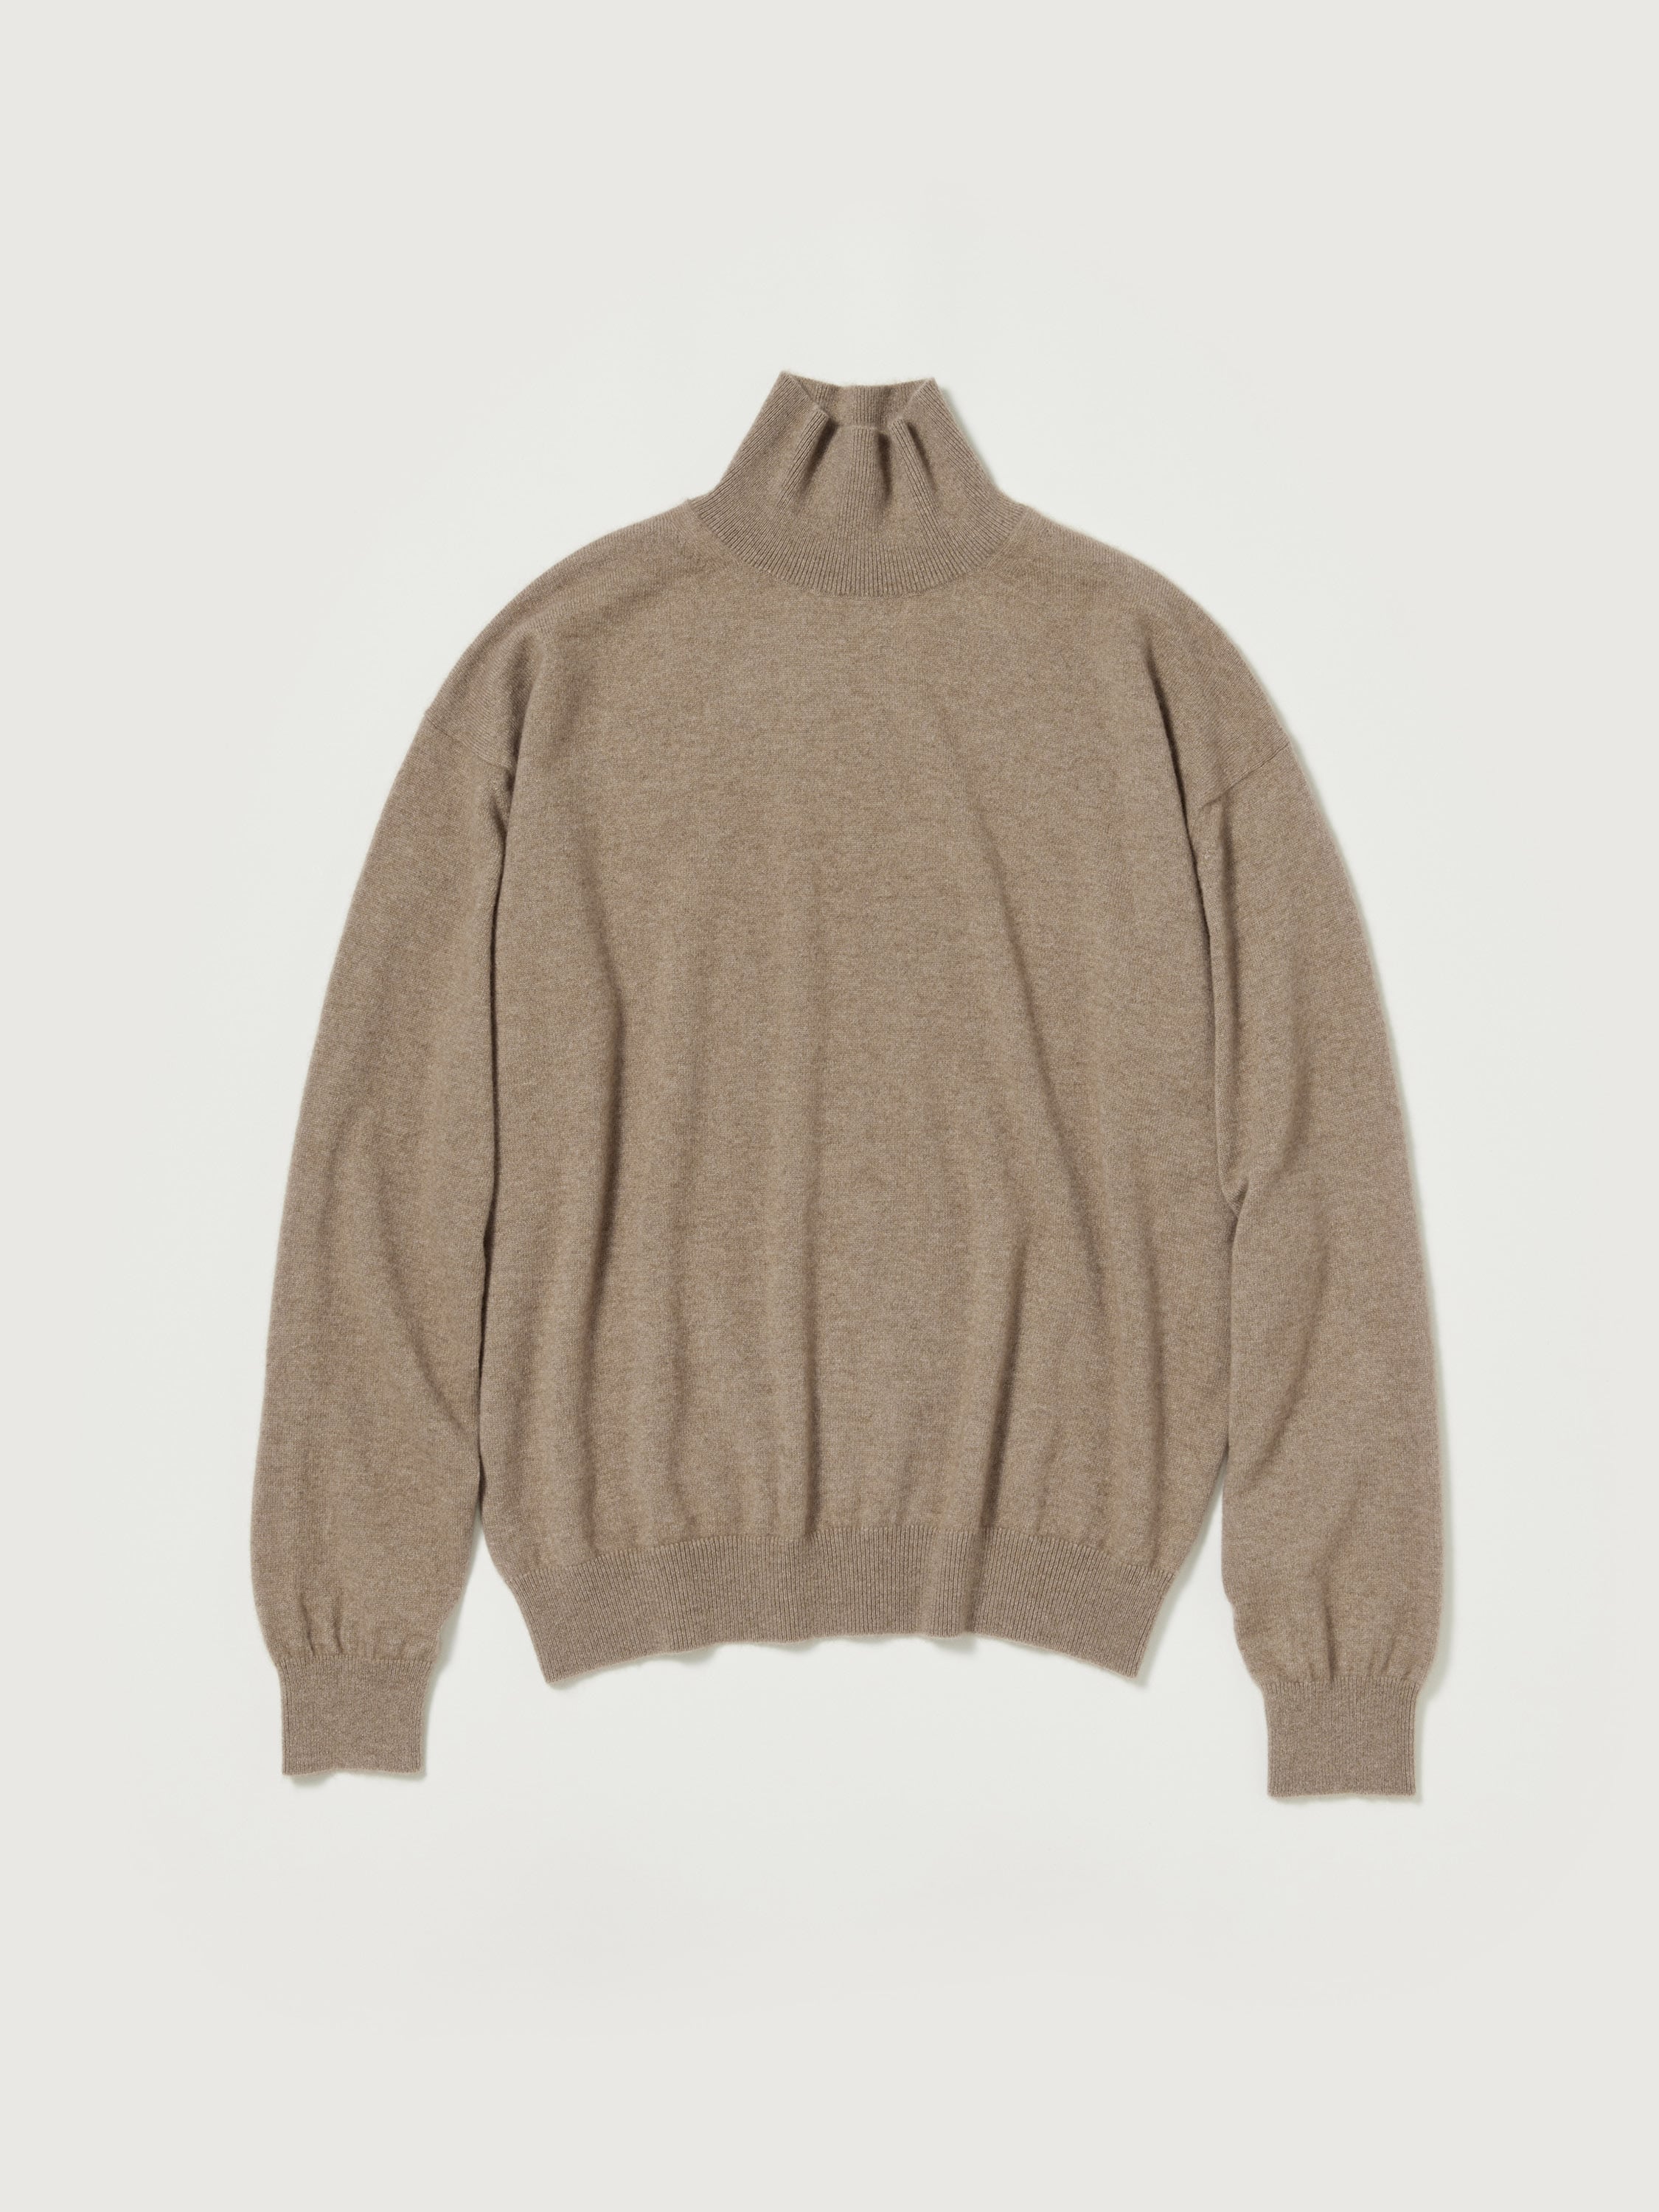 BABY CASHMERE KNIT TURTLE 詳細画像 NATURAL BROWN 6